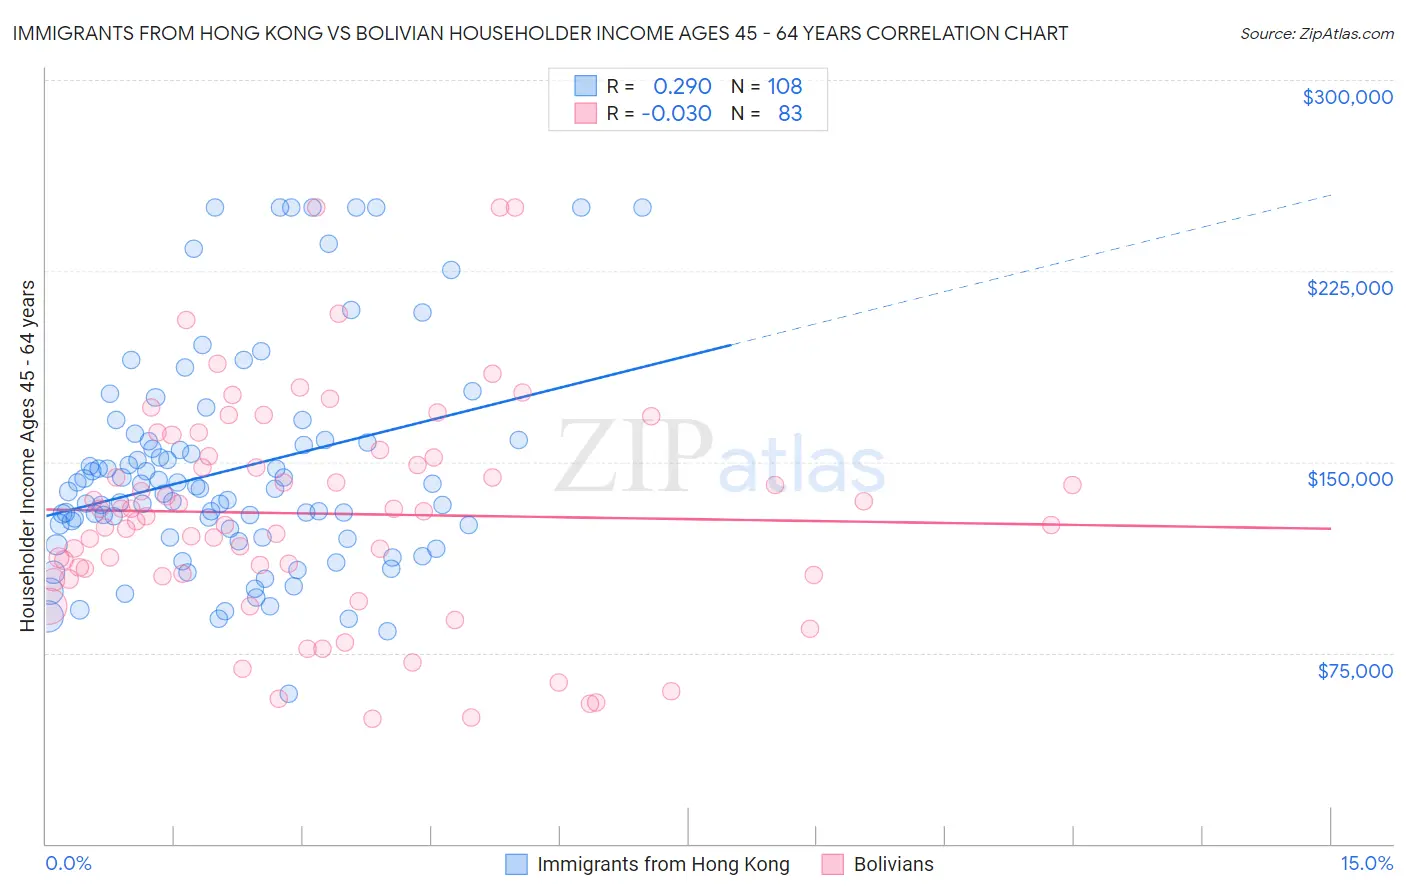 Immigrants from Hong Kong vs Bolivian Householder Income Ages 45 - 64 years